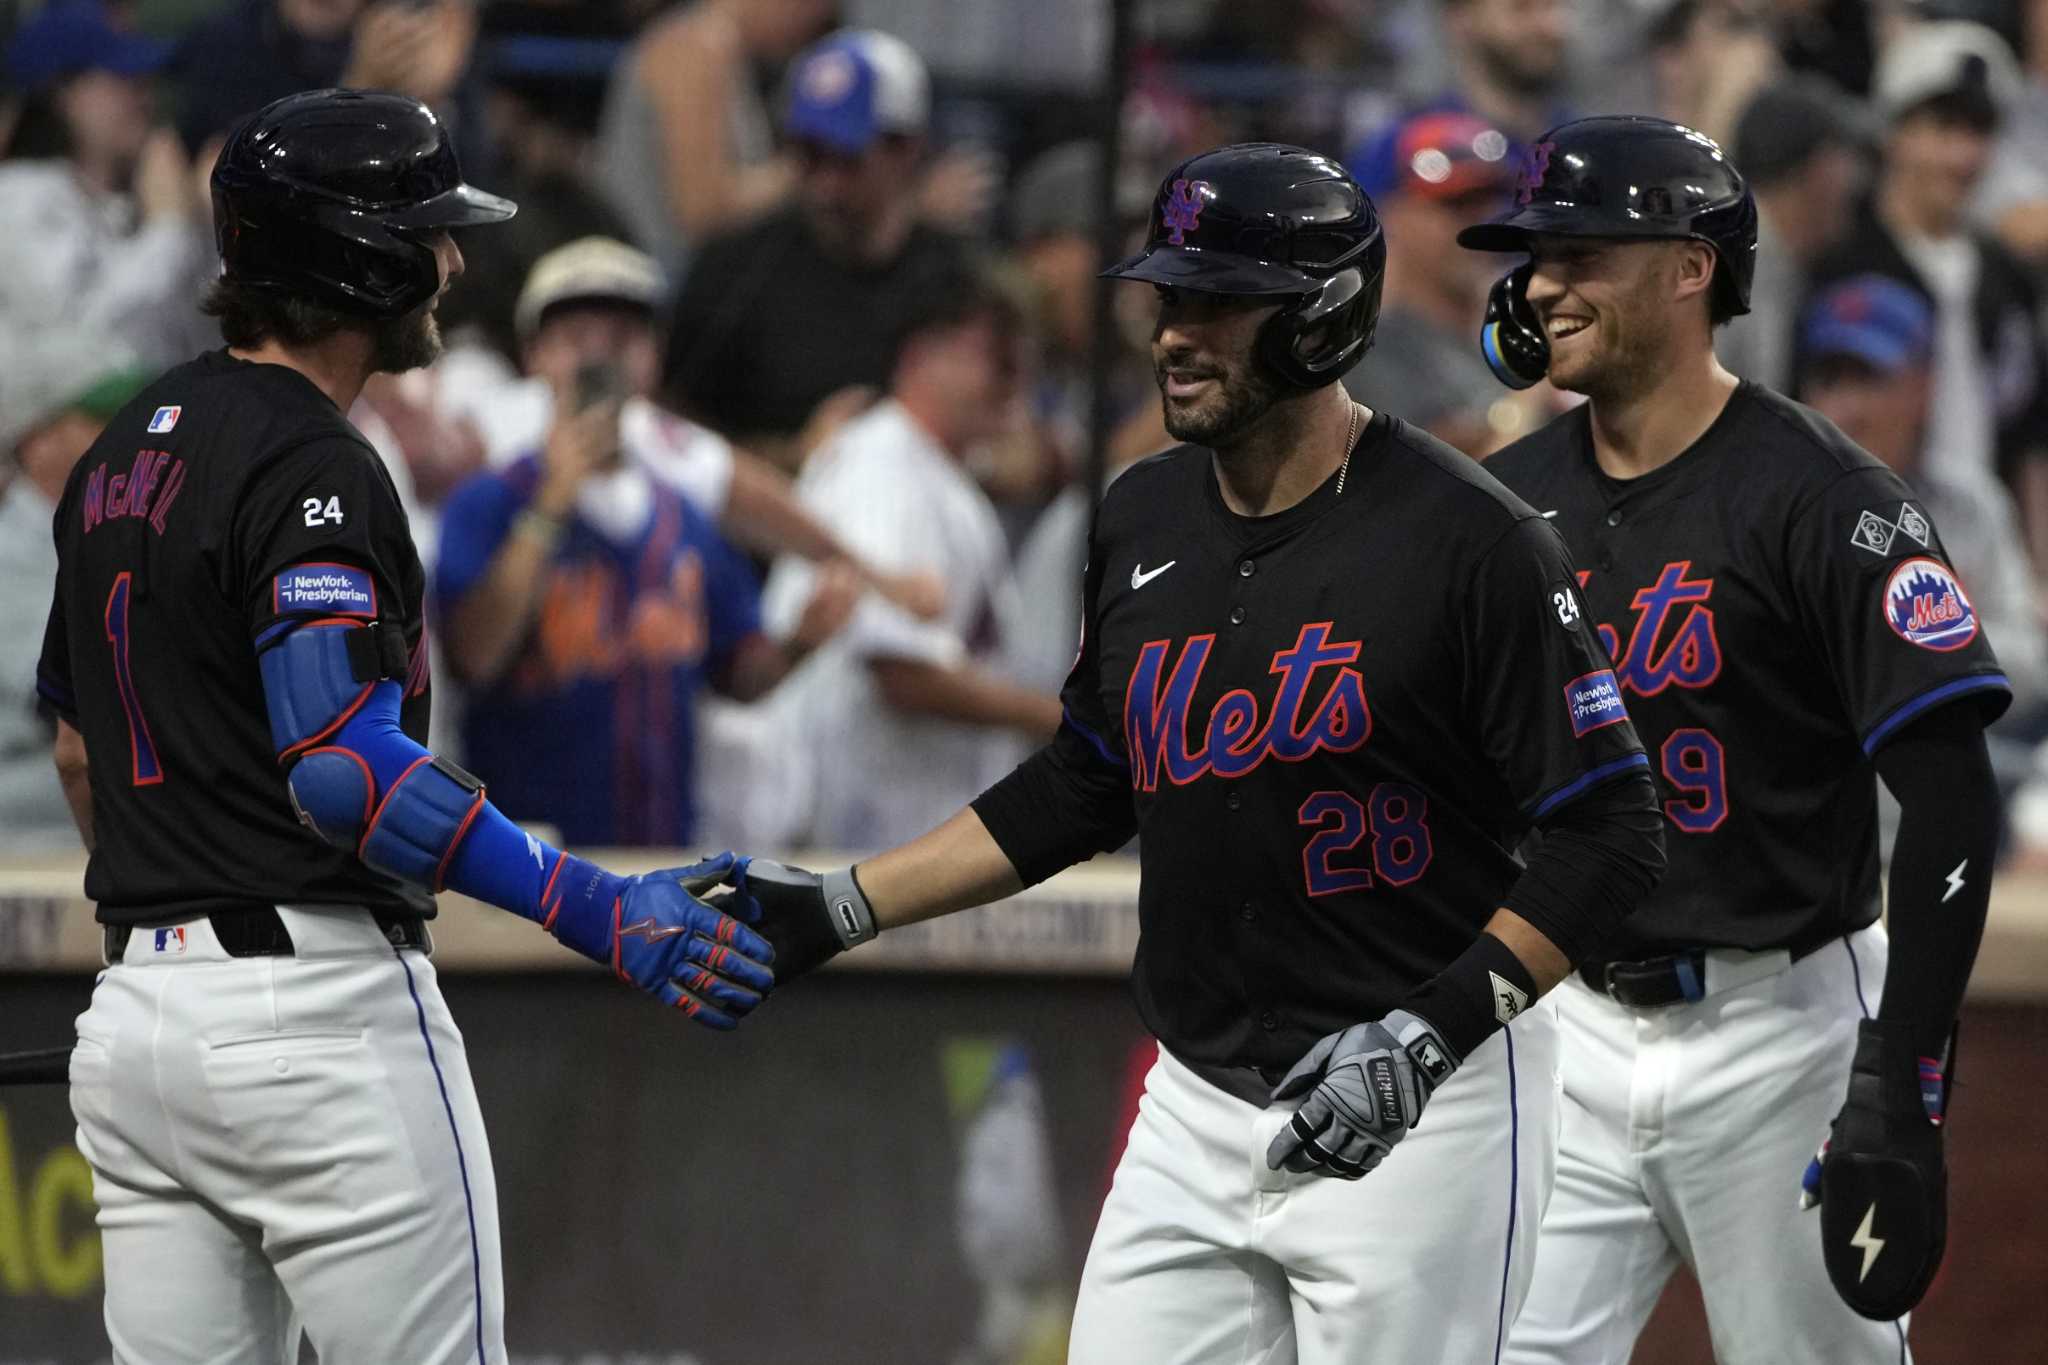 Mets move past Braves in NL wild card race as Senga gets hurt again, Martinez hits slam in 8-4 win